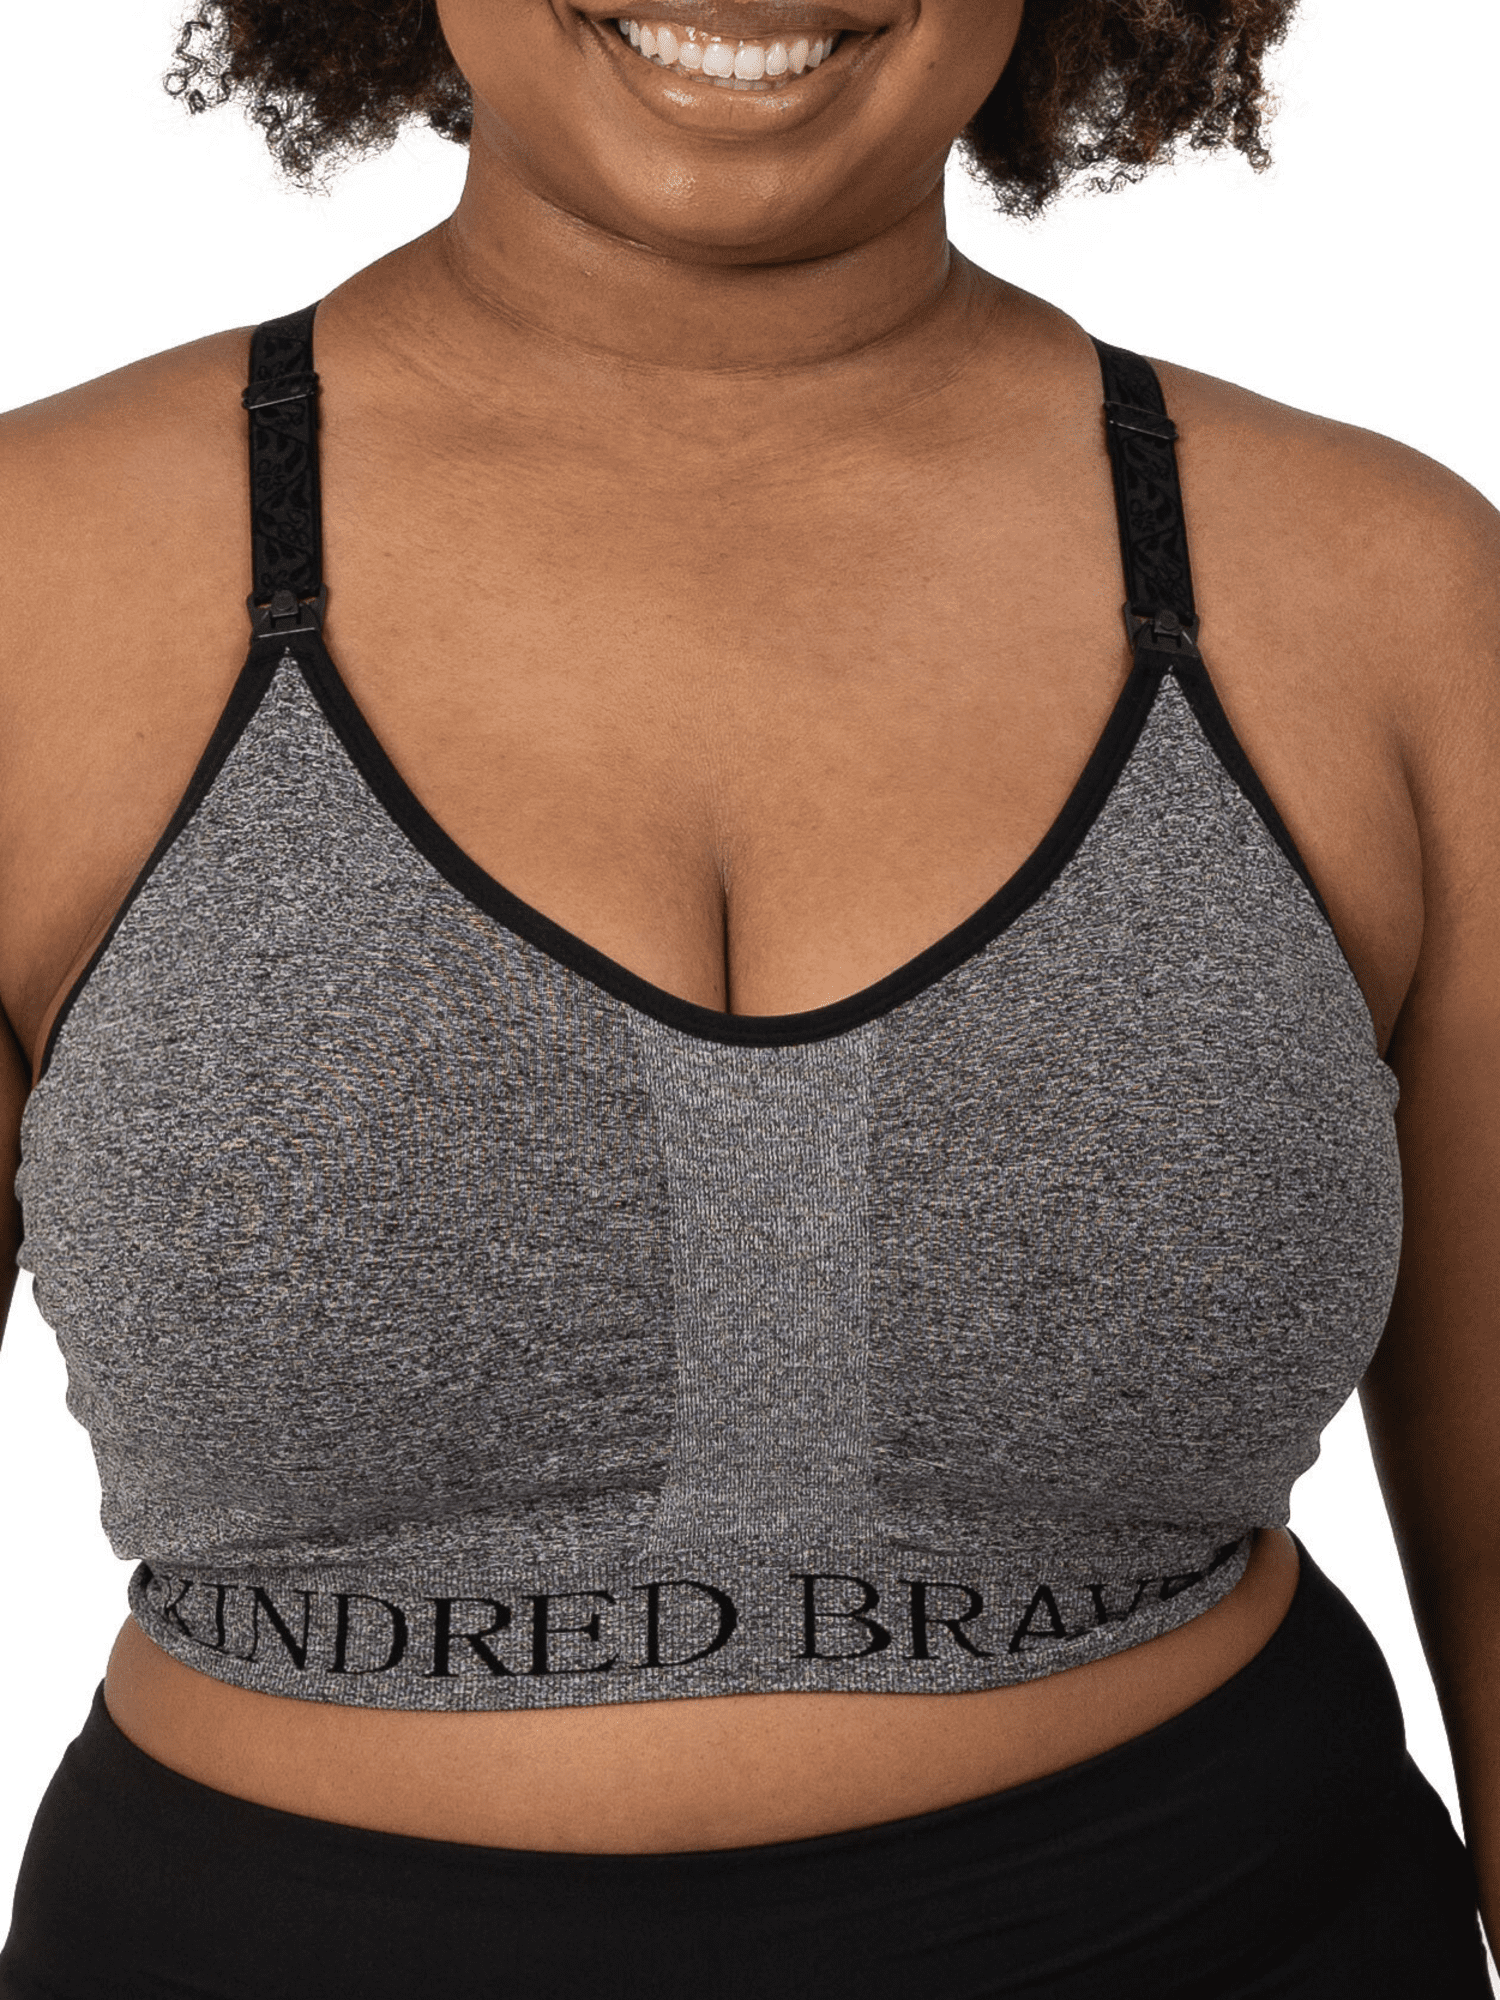 Kindred Bravely Sublime Nursing Sports Bra, Busty, Small, Ombre Storm